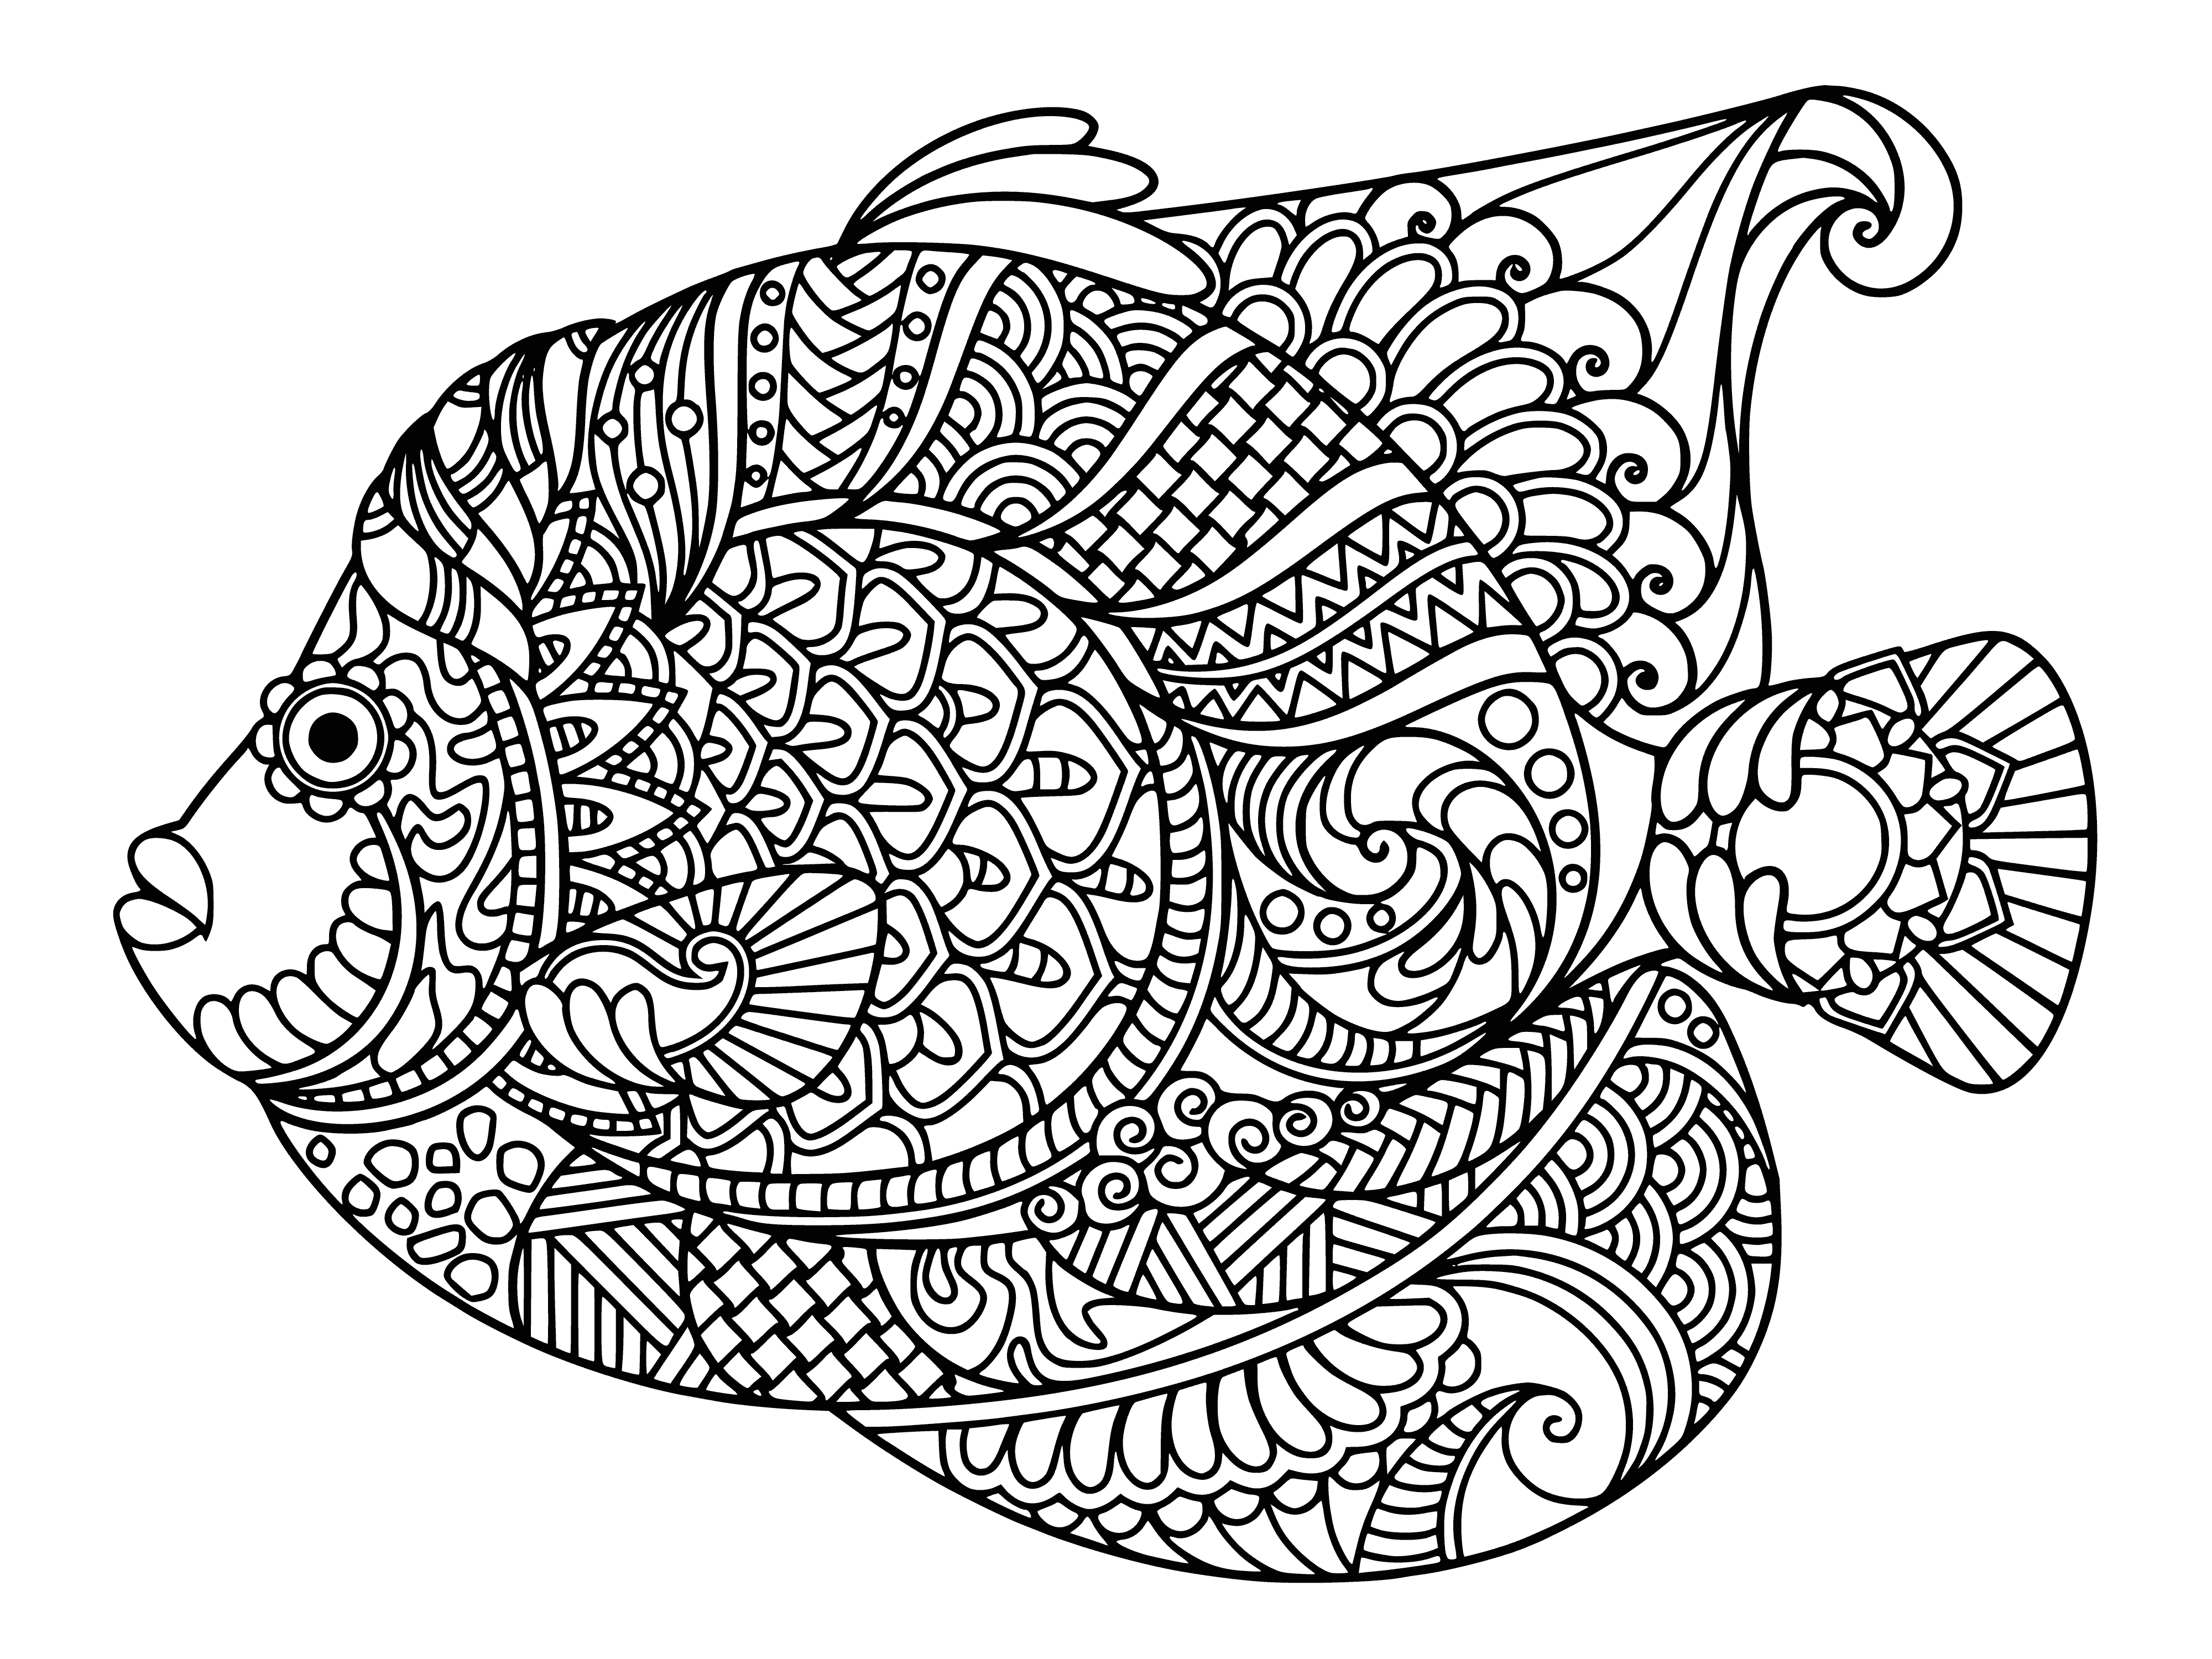 coloring page: Fish angel coloring page with bright colors & intricate patterns, surrounded by smaller fish swimming in different directions - creating a peaceful atmosphere.